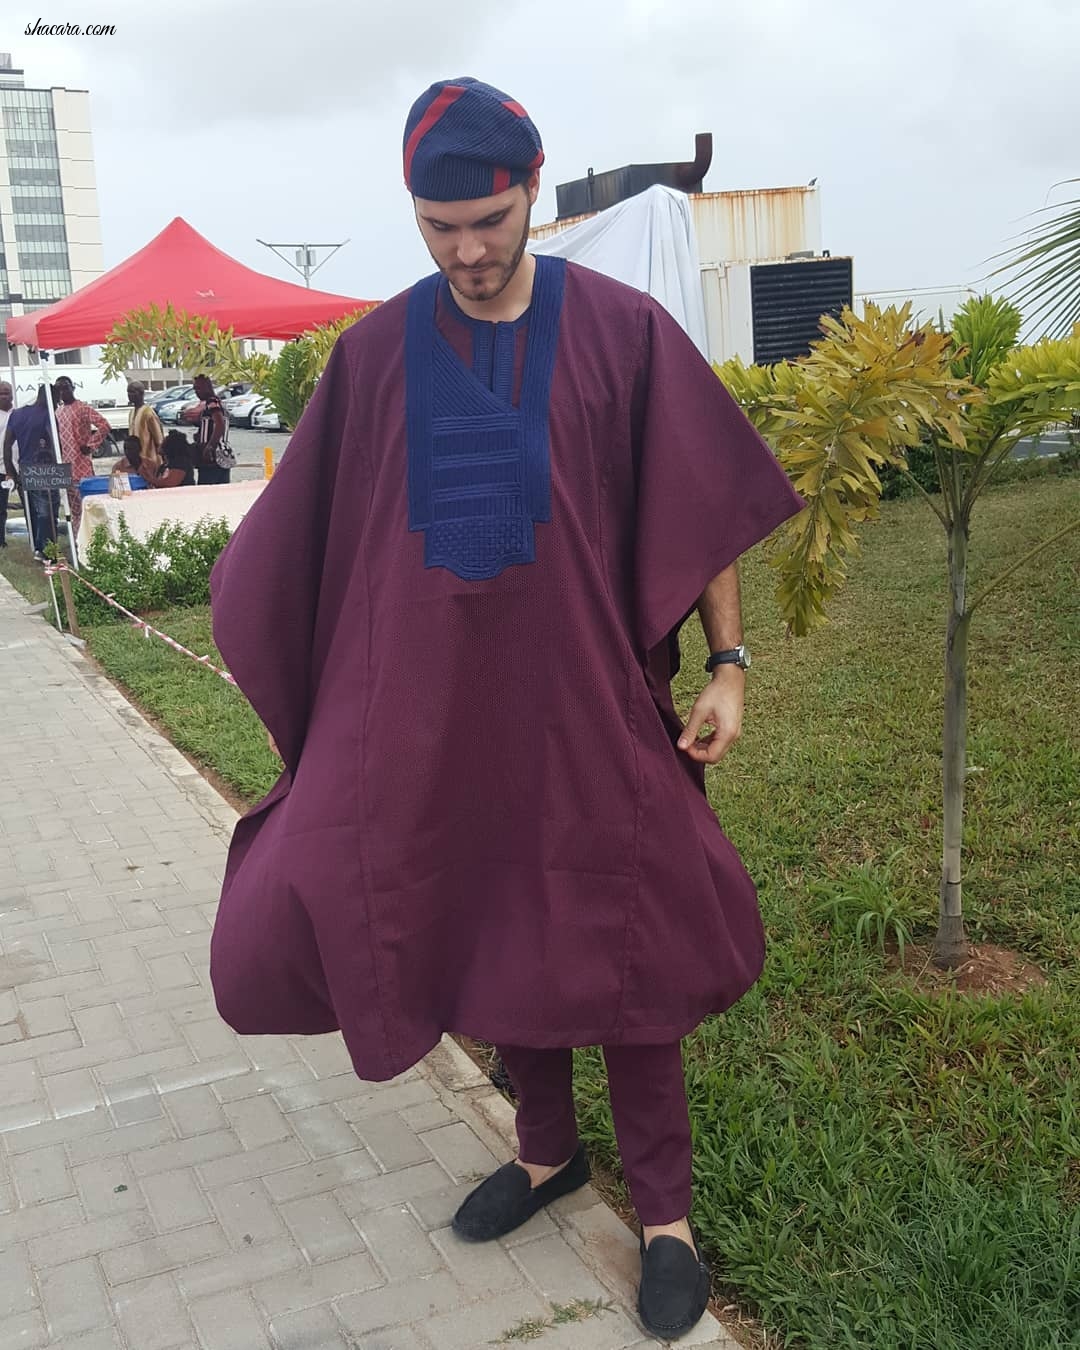 Demons Or Angels? Check Out The Hot Men At Banky W & Adesua Etomi’s Traditional Wedding